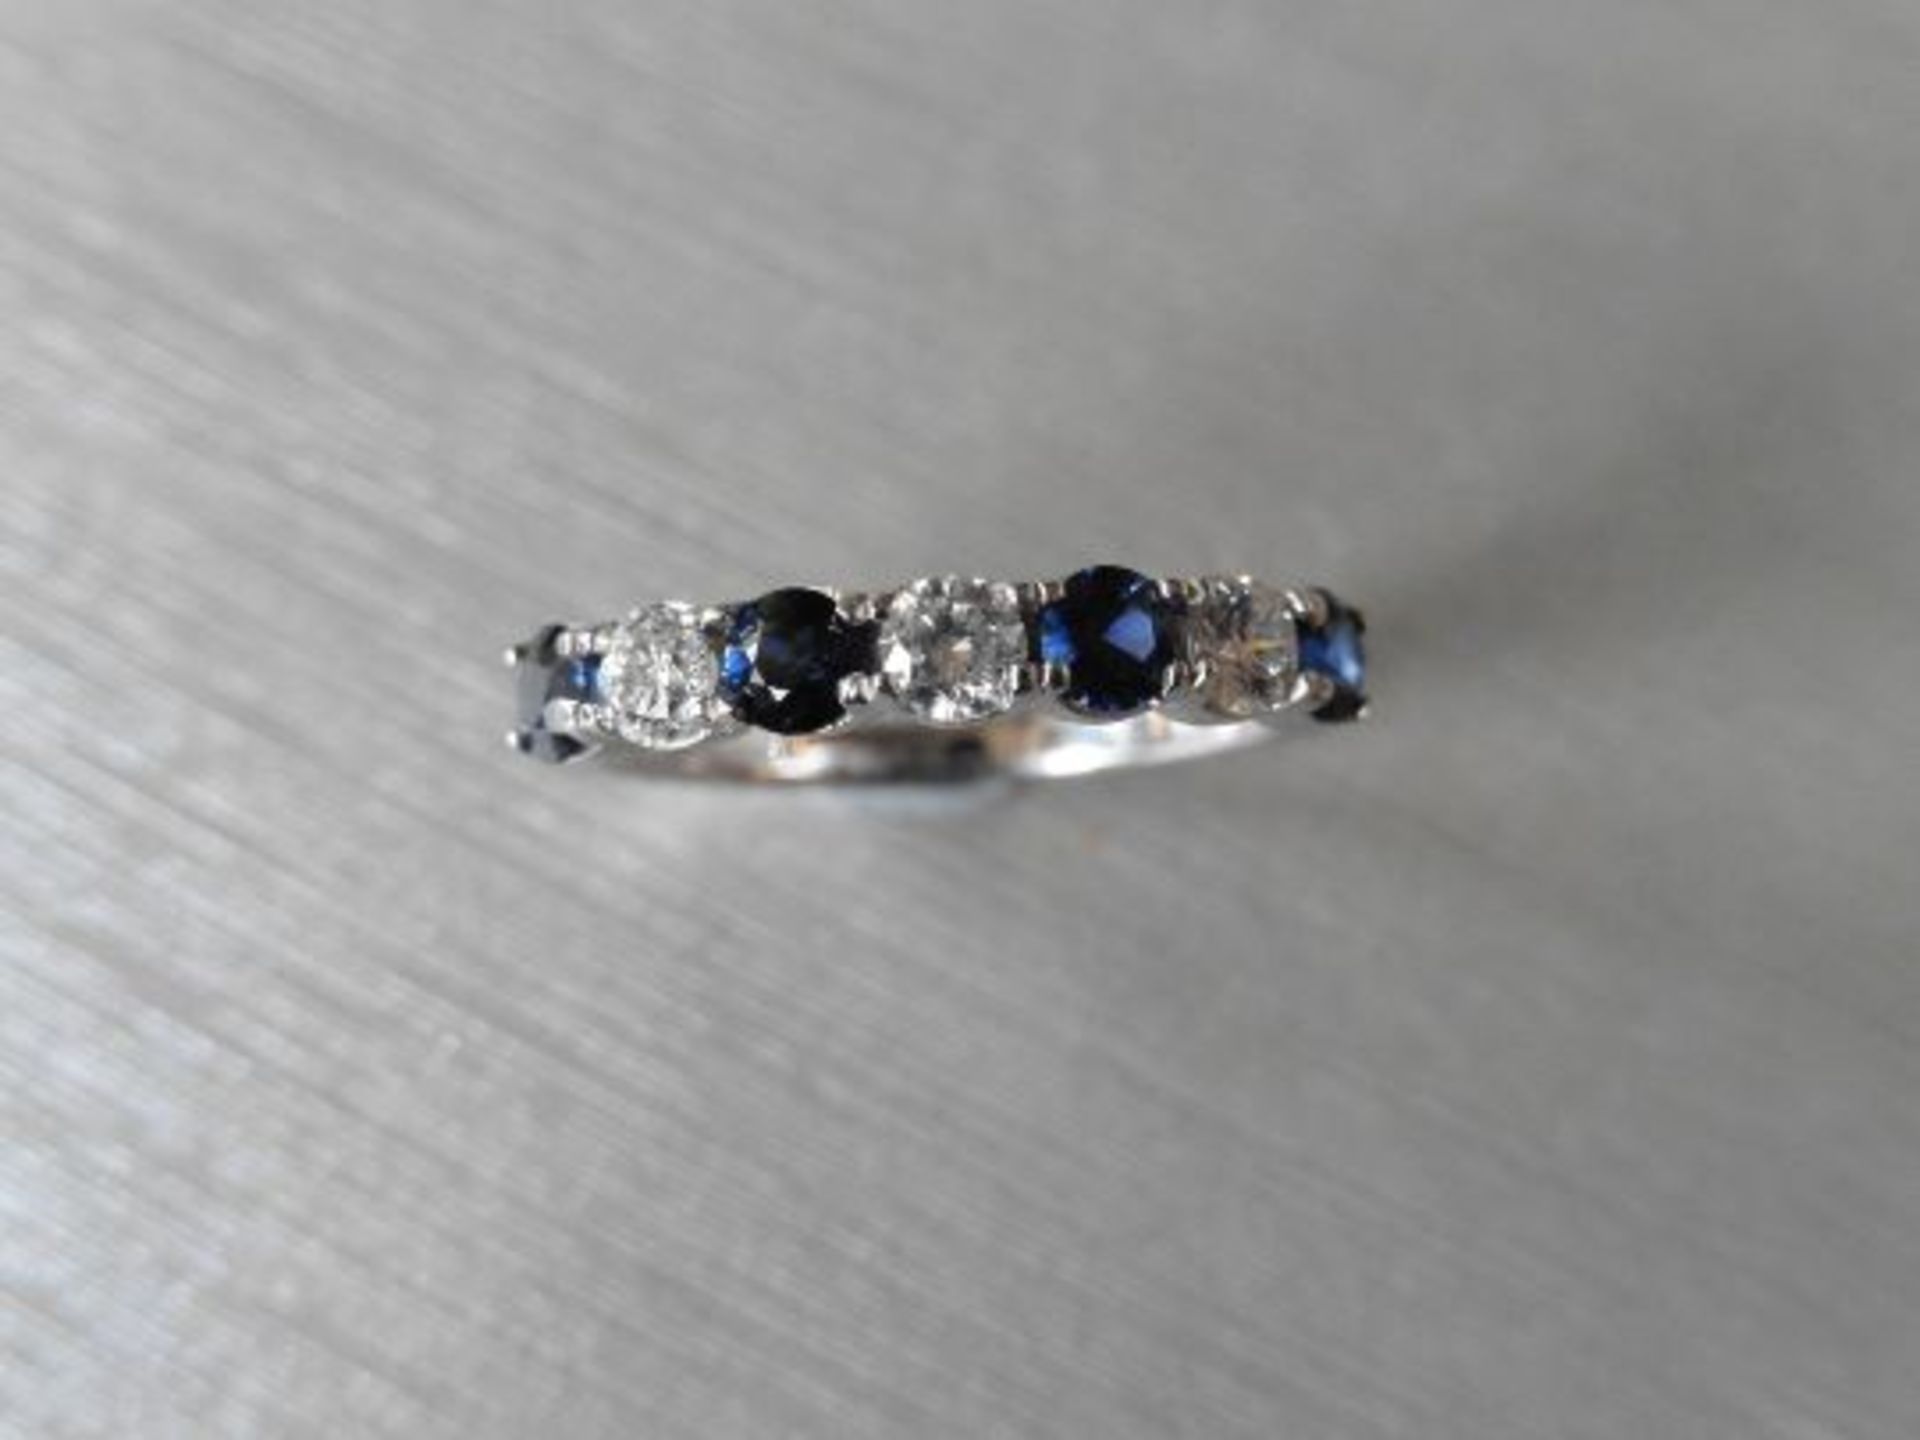 Sapphire and diamond eternity style ring. 4 round cut sapphires ( treated) 3 brilliant cut diamonds. - Image 3 of 3